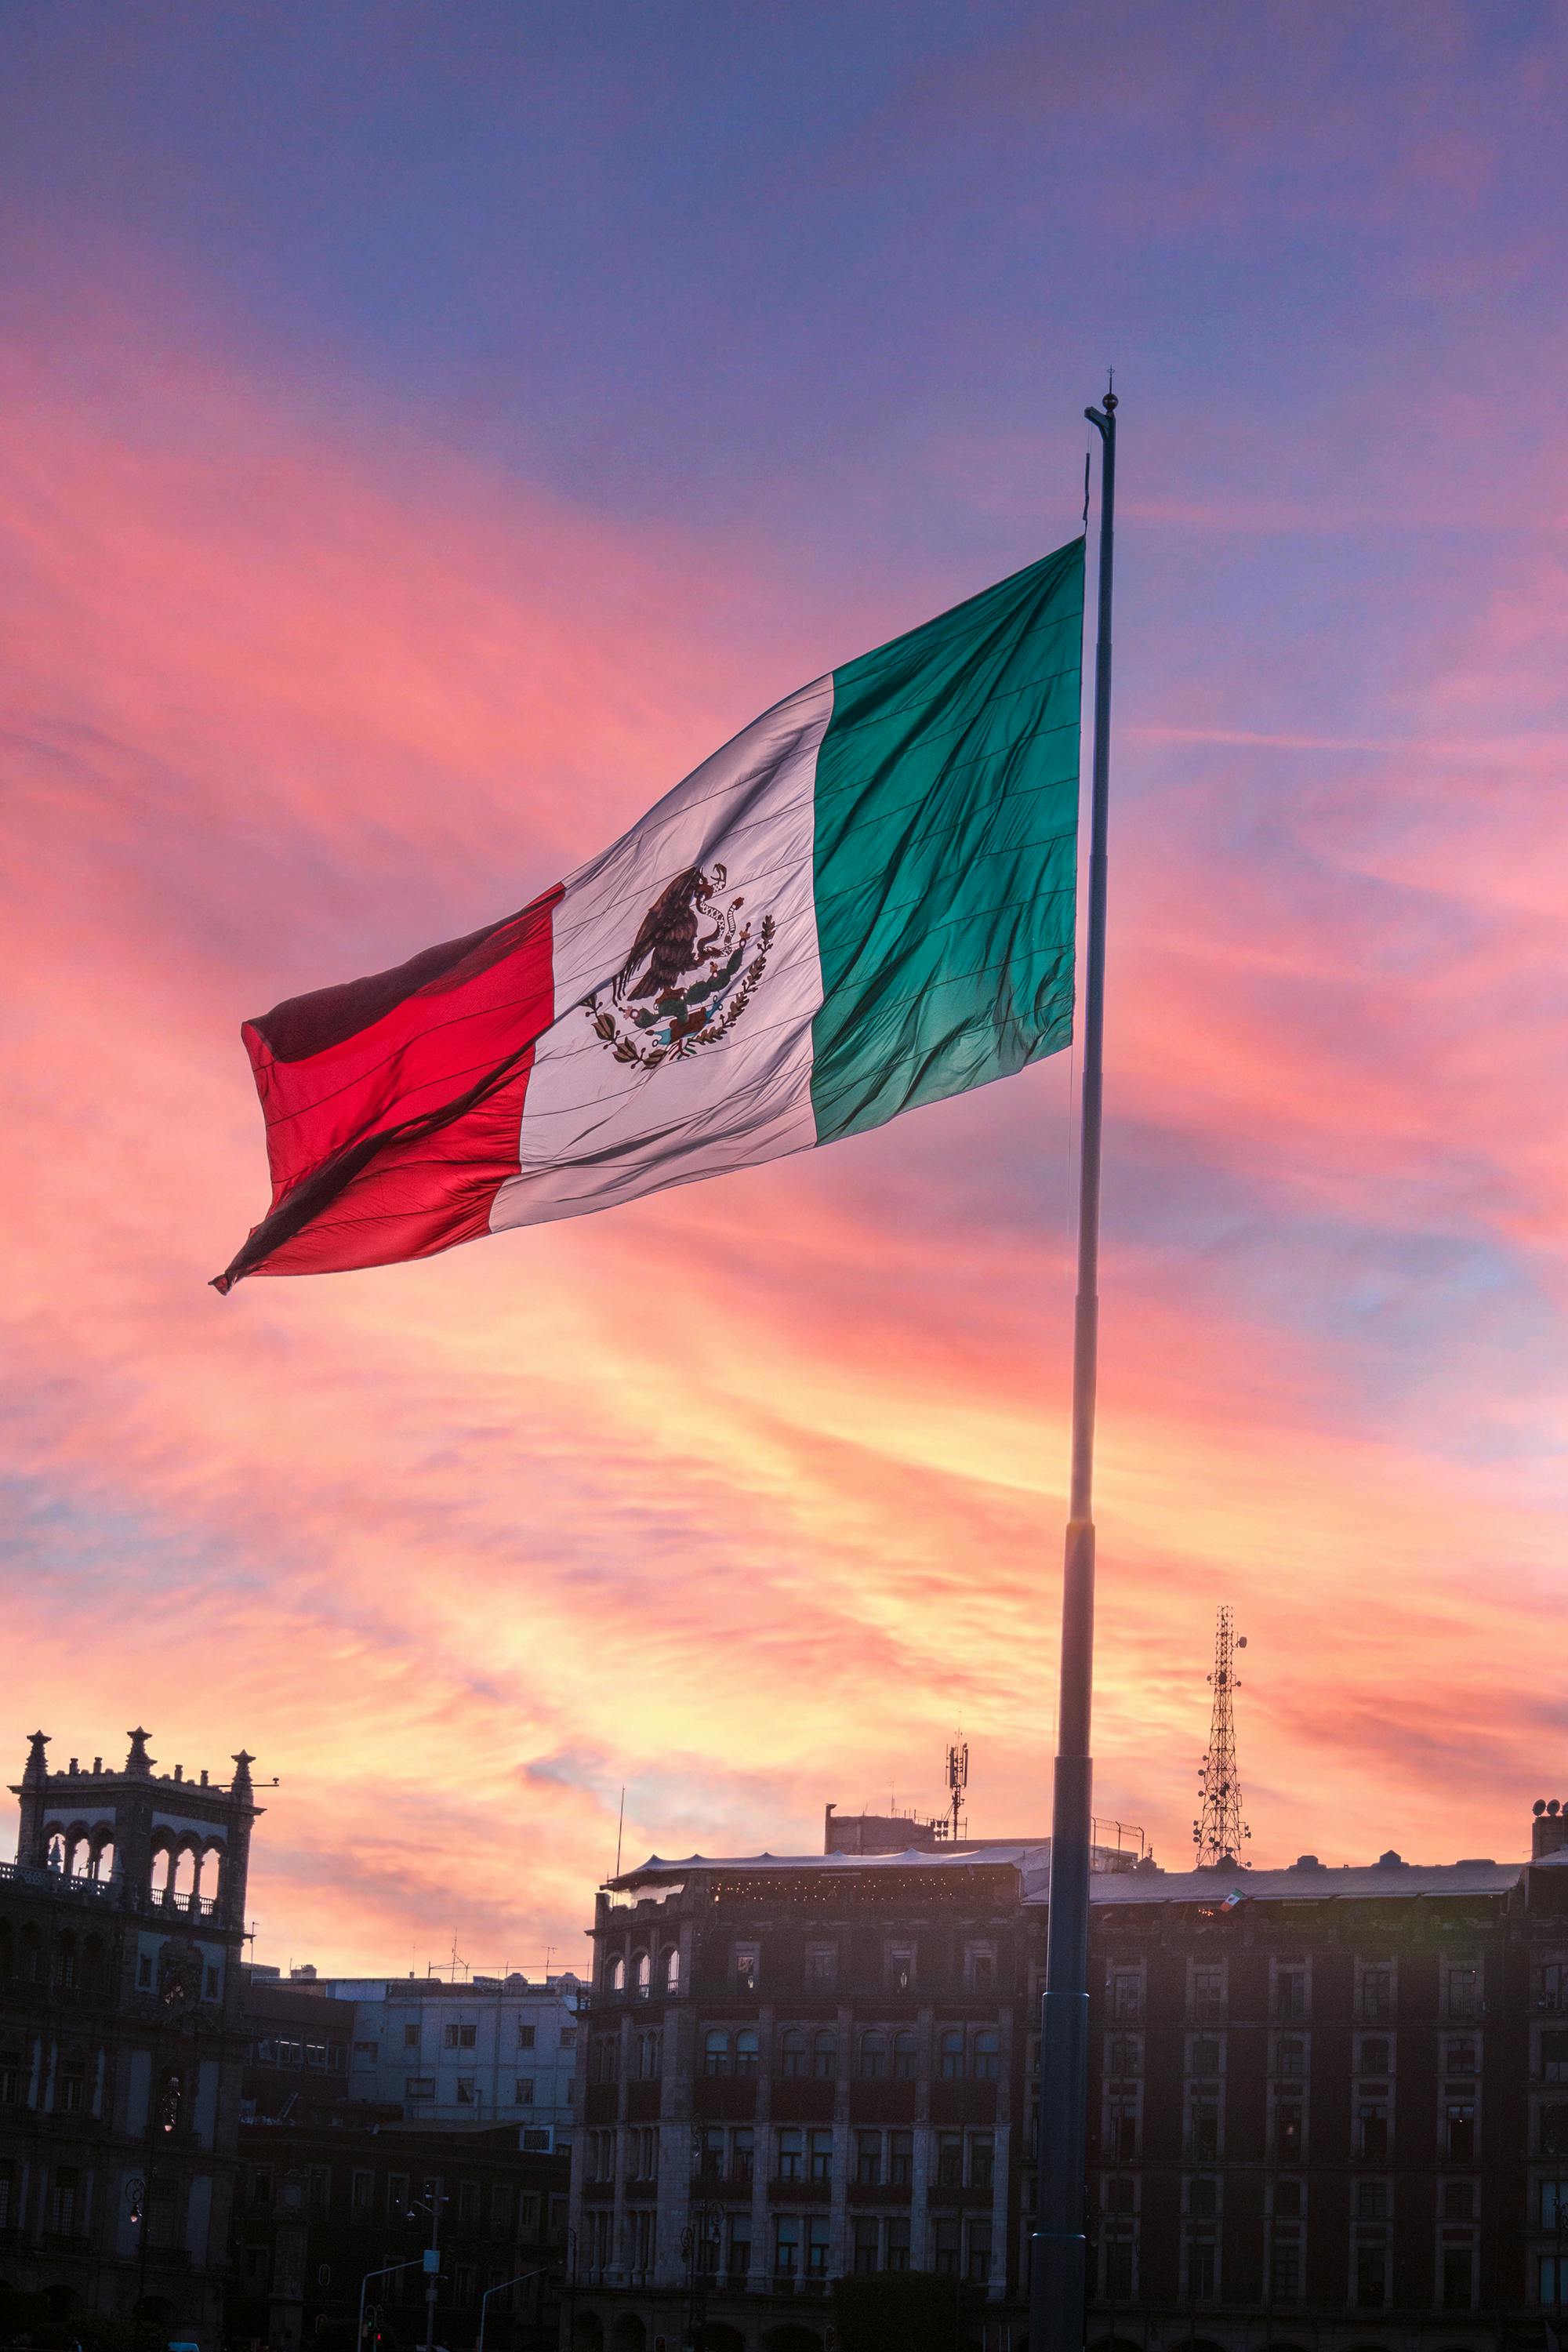 Mexican Flag Wallpaper Images  Free Download on Freepik